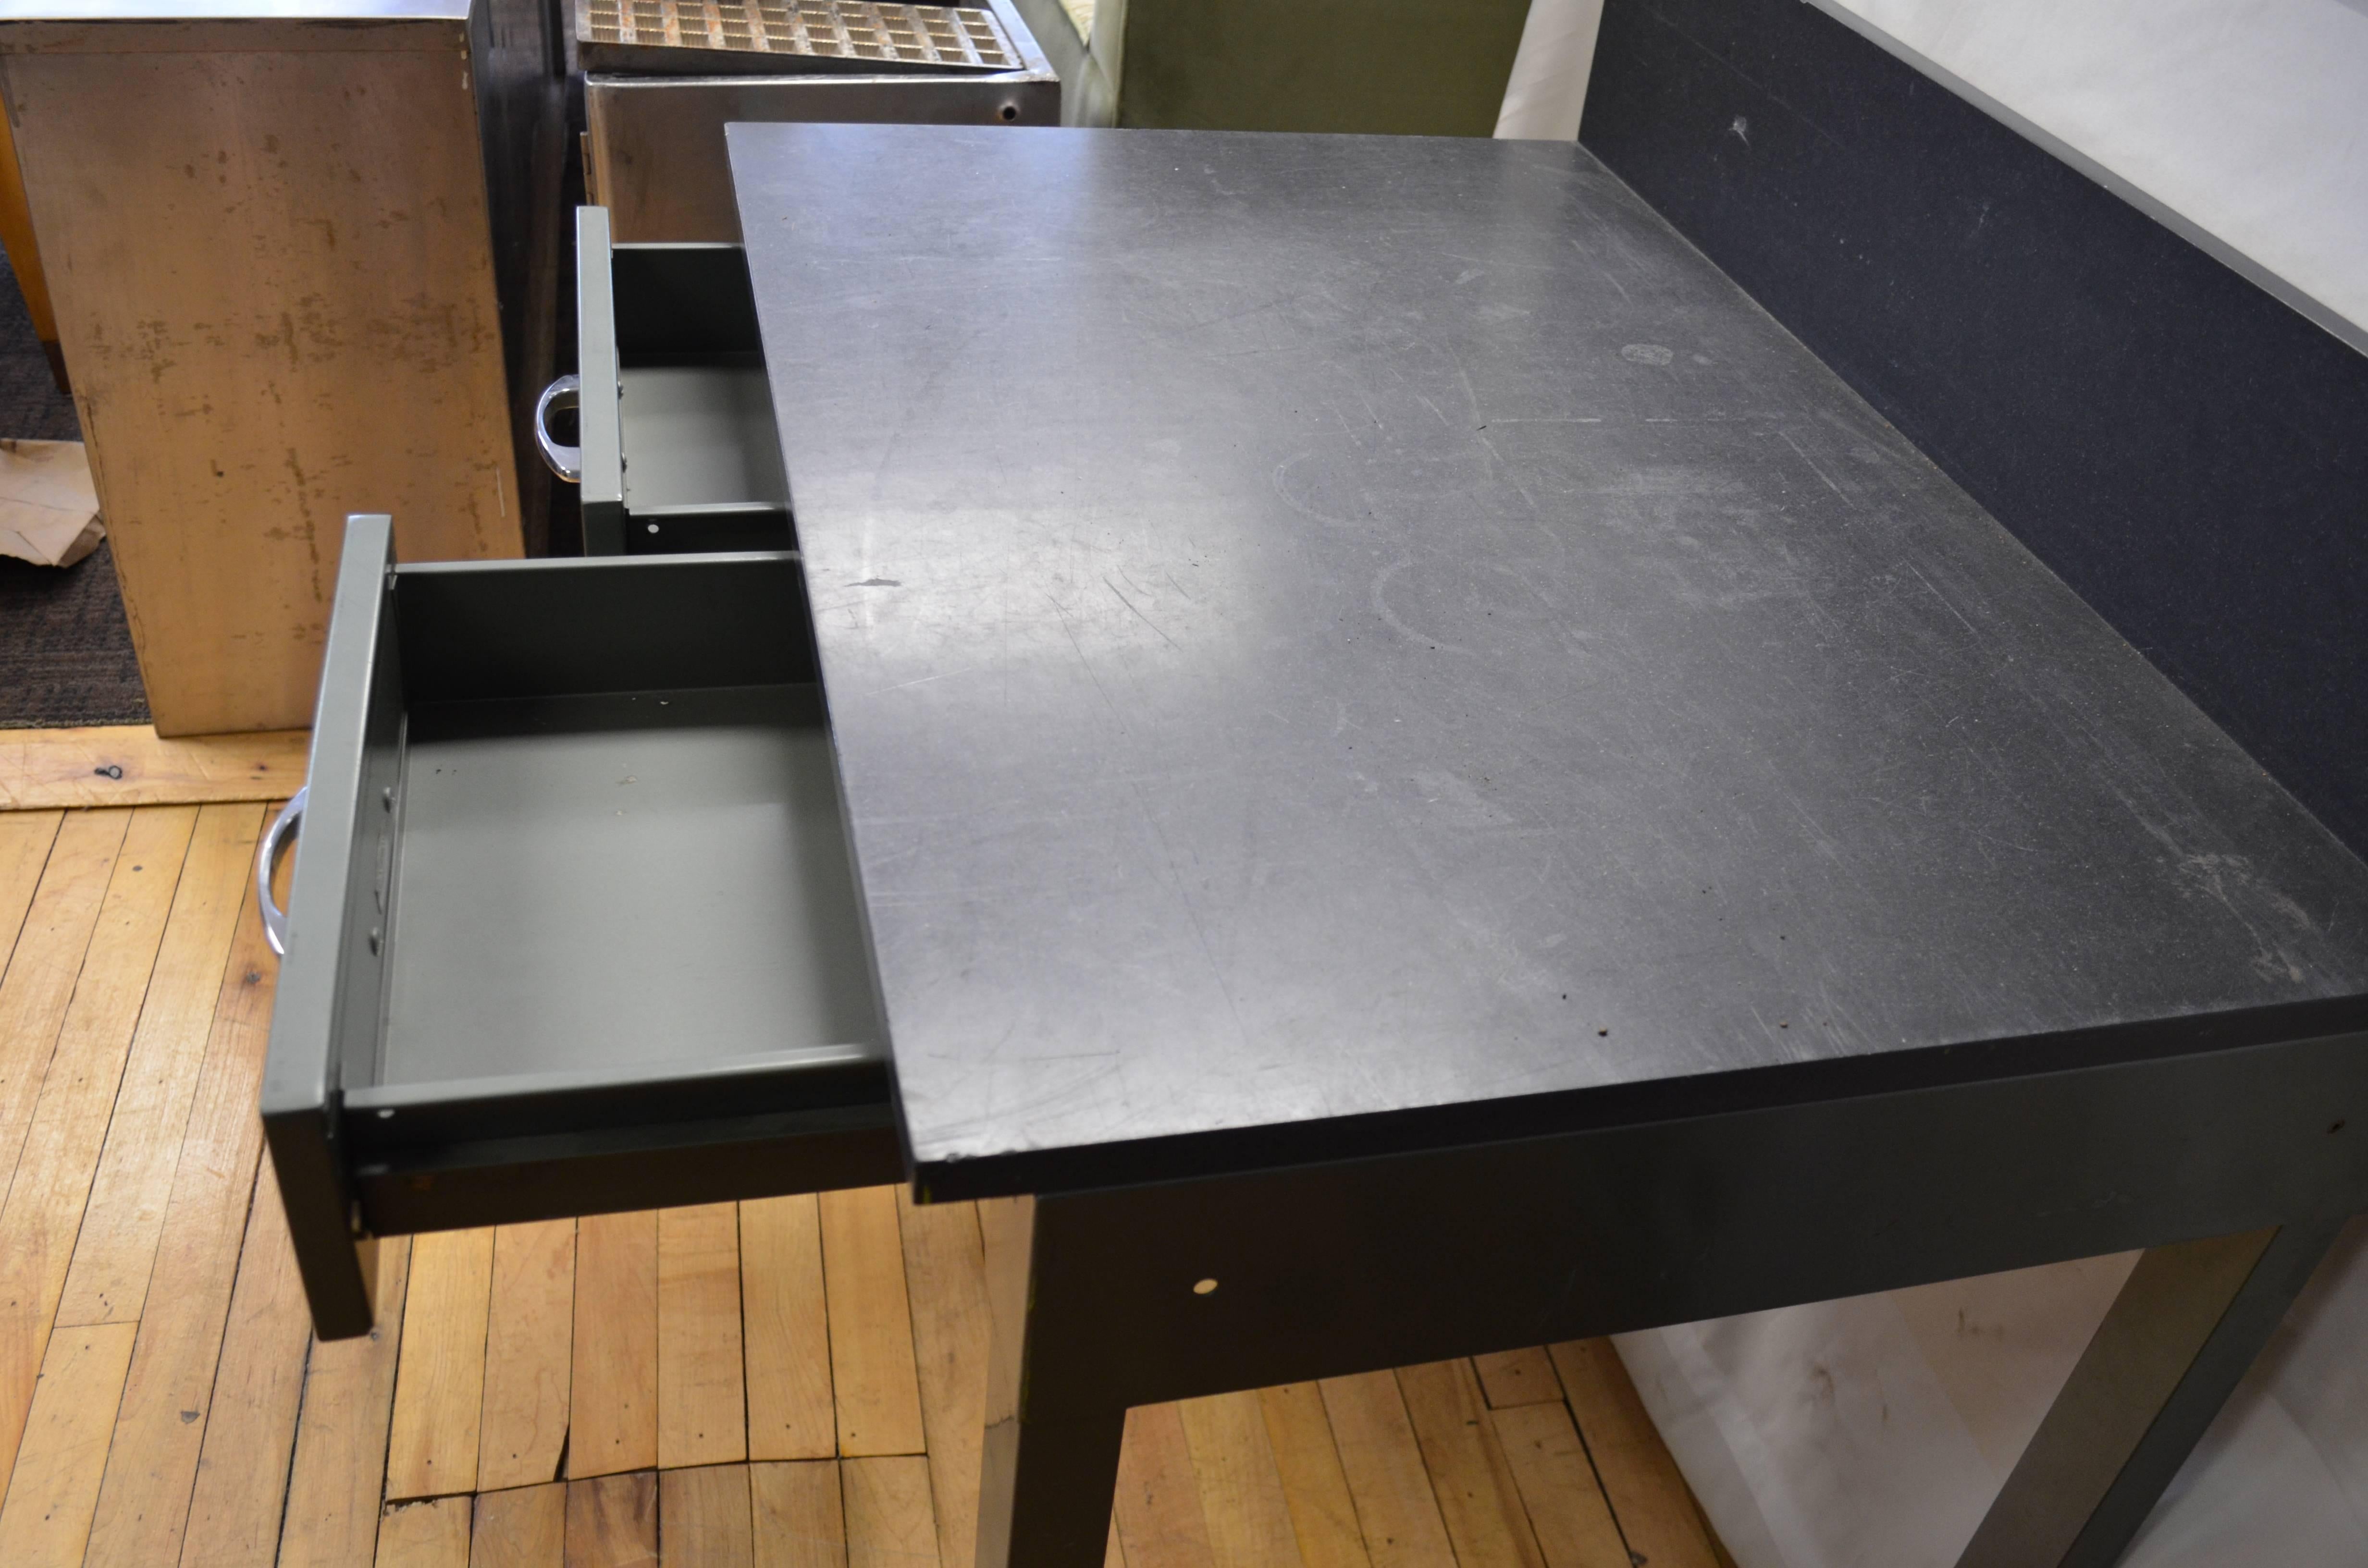 American Mid-Century Steel Desk with As-Found Slate Top and Backsplash